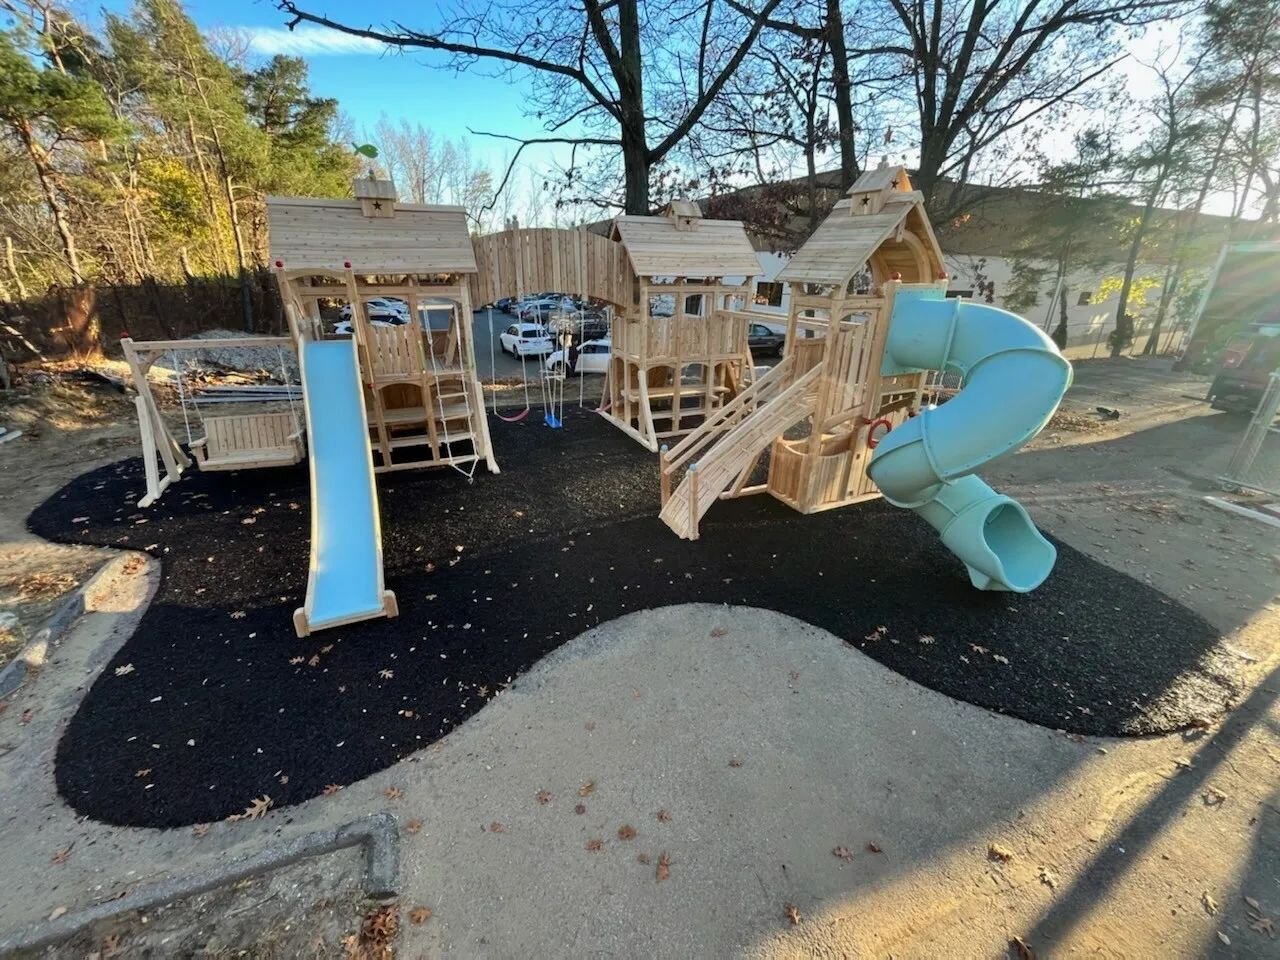 All we can say is wow. Now this is a Playscape Dream 😍

- Bonded Rubber Mulch - 

#playset #playsets #northernwhitecedar #cedarworks #cedarworksplayset #playsiteservices#fun #familyfun #surface #safetysurface #playscape#rubbermulch #bondedrubbermulc